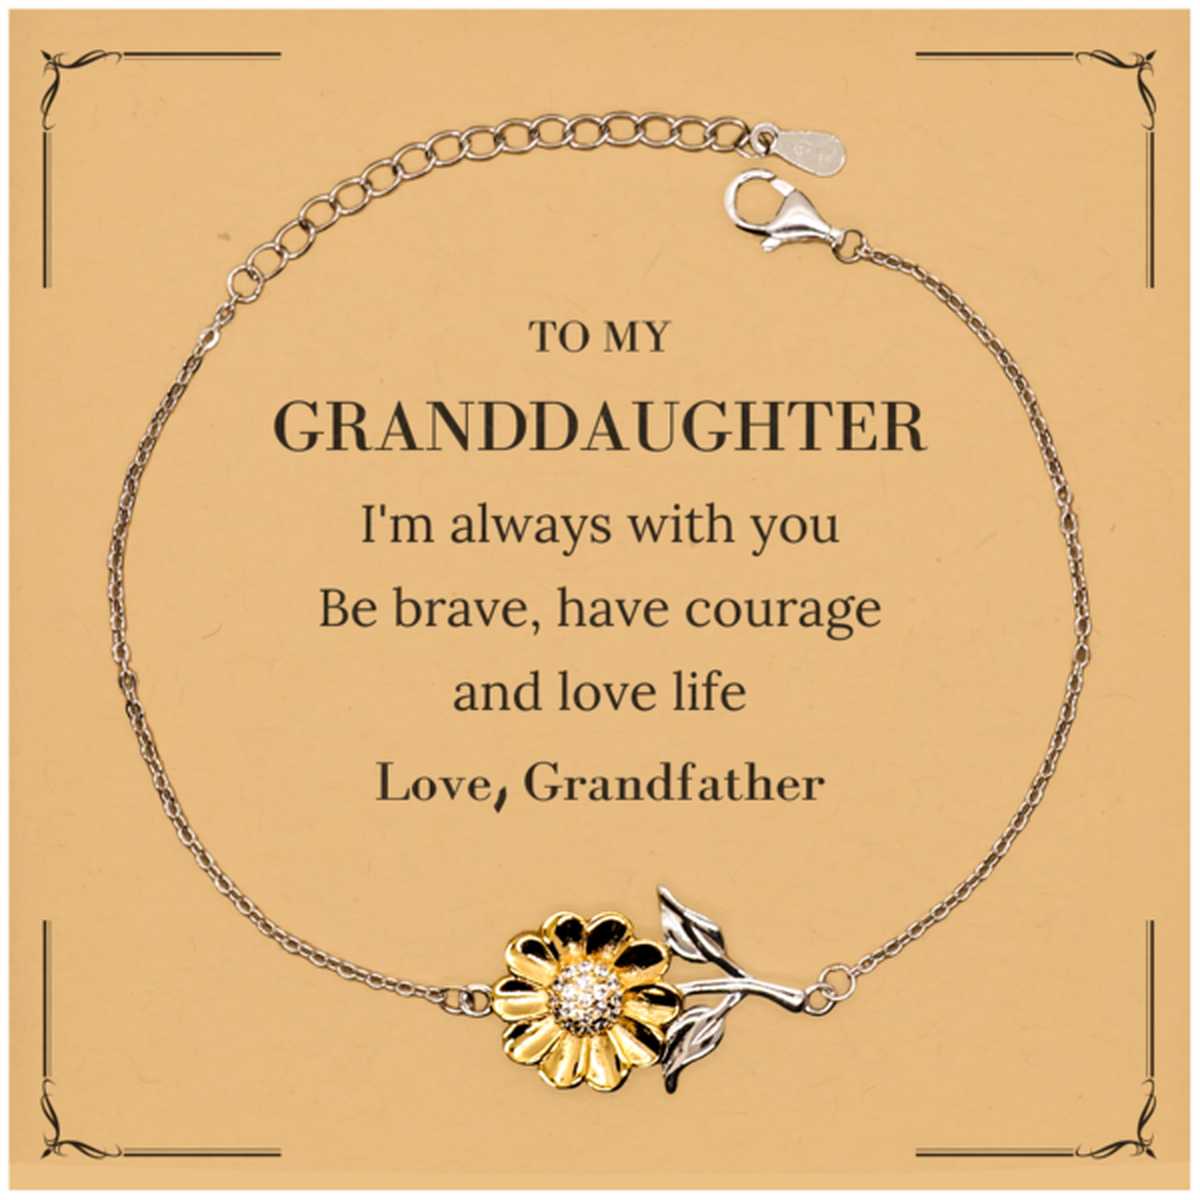 To My Granddaughter Gifts from Grandfather, Unique Sunflower Bracelet Inspirational Christmas Birthday Graduation Gifts for Granddaughter I'm always with you. Be brave, have courage and love life. Love, Grandfather